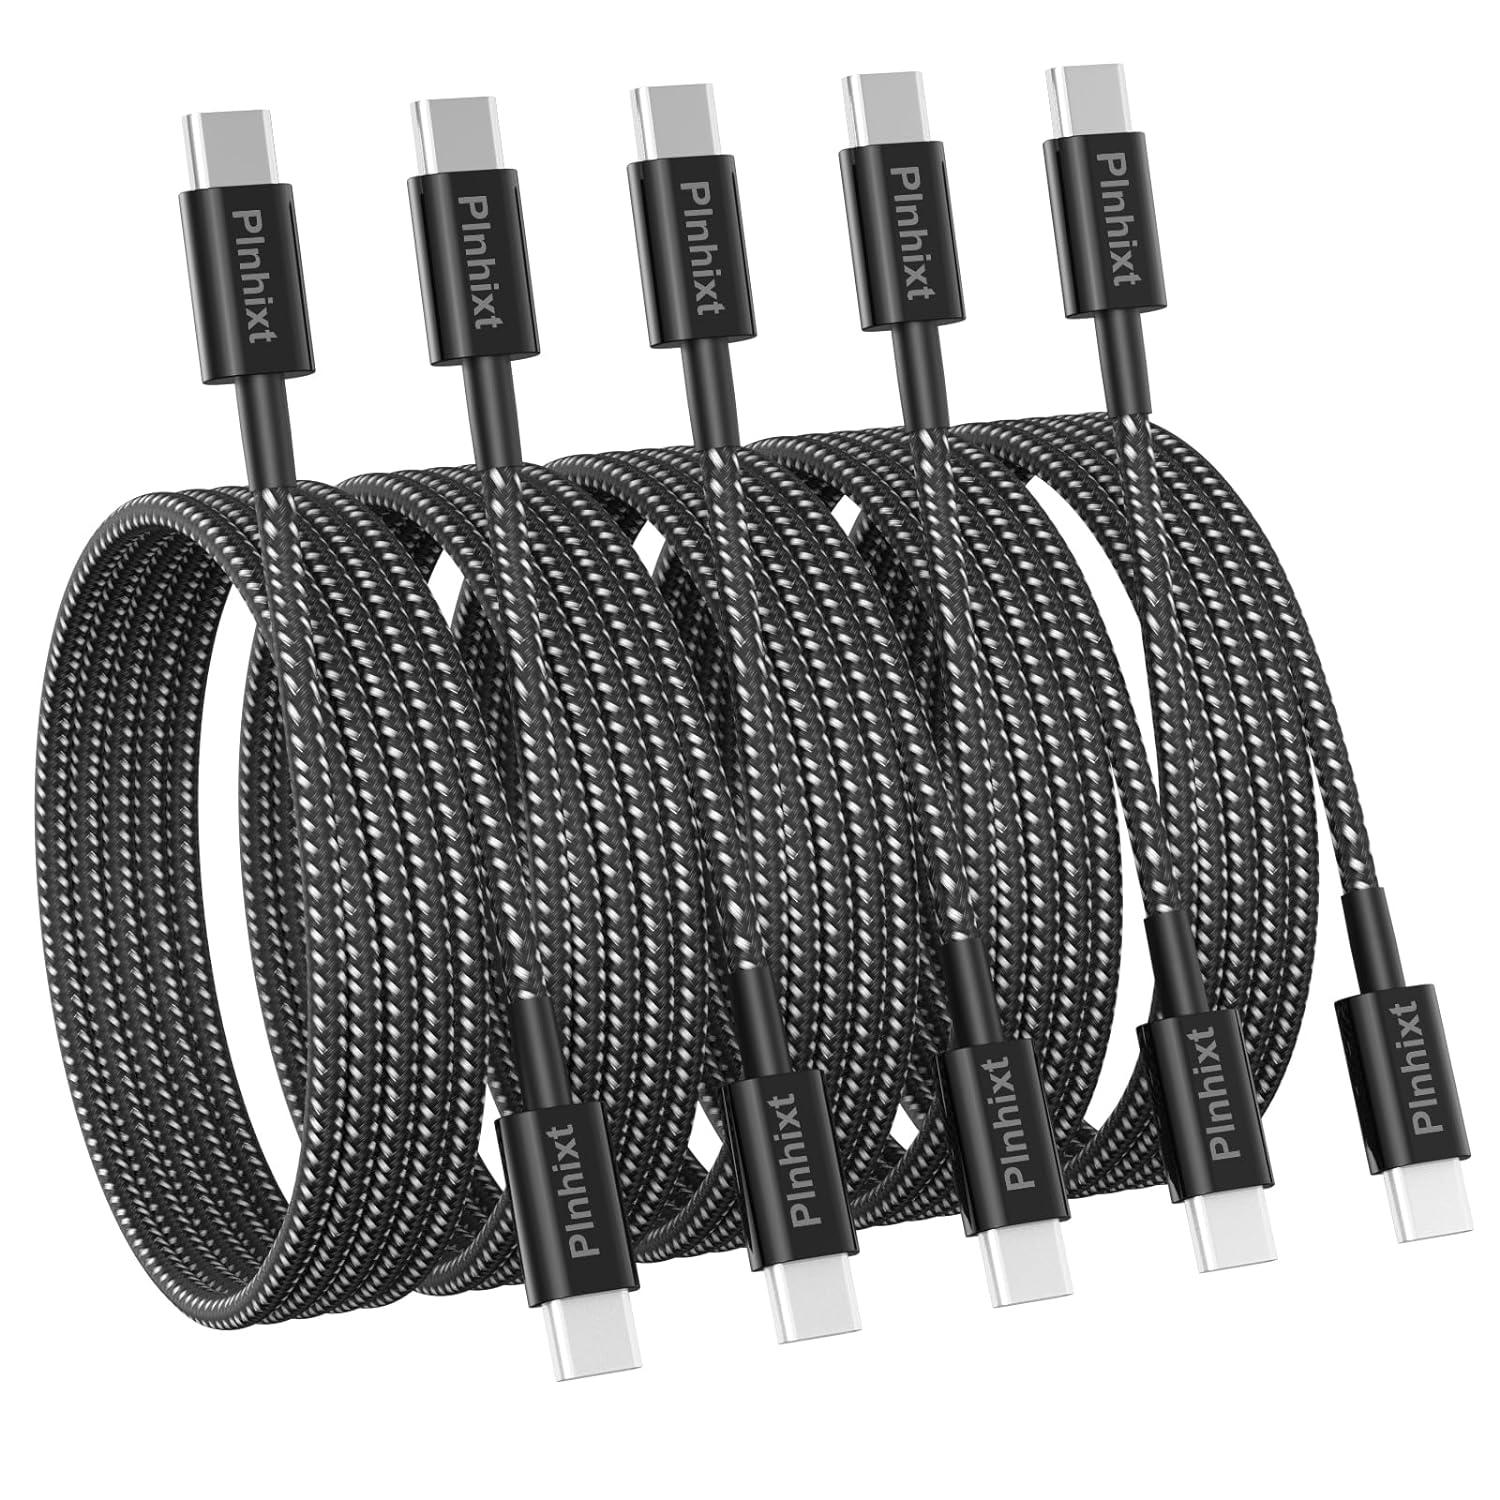 USB-C to USB-C 6ft 60w Charging Cables 5 Pack for $4.98